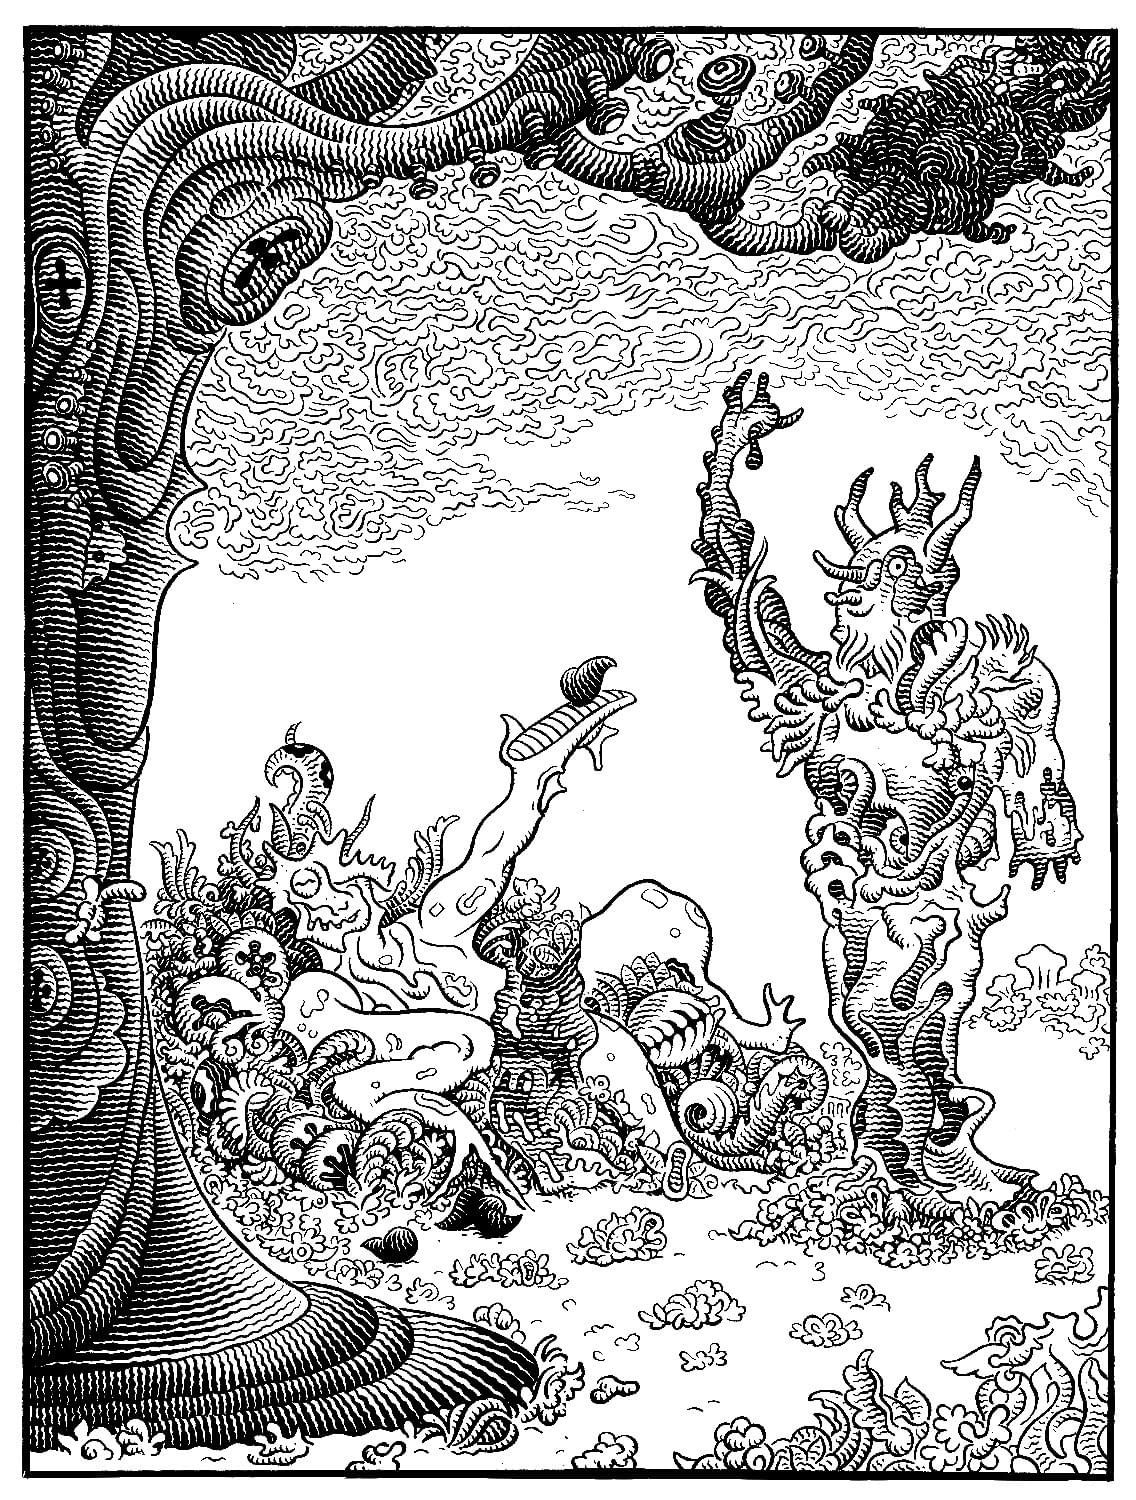 Illustrated by Jim Woodring, Introduction by Alan Moore - Kickstarter